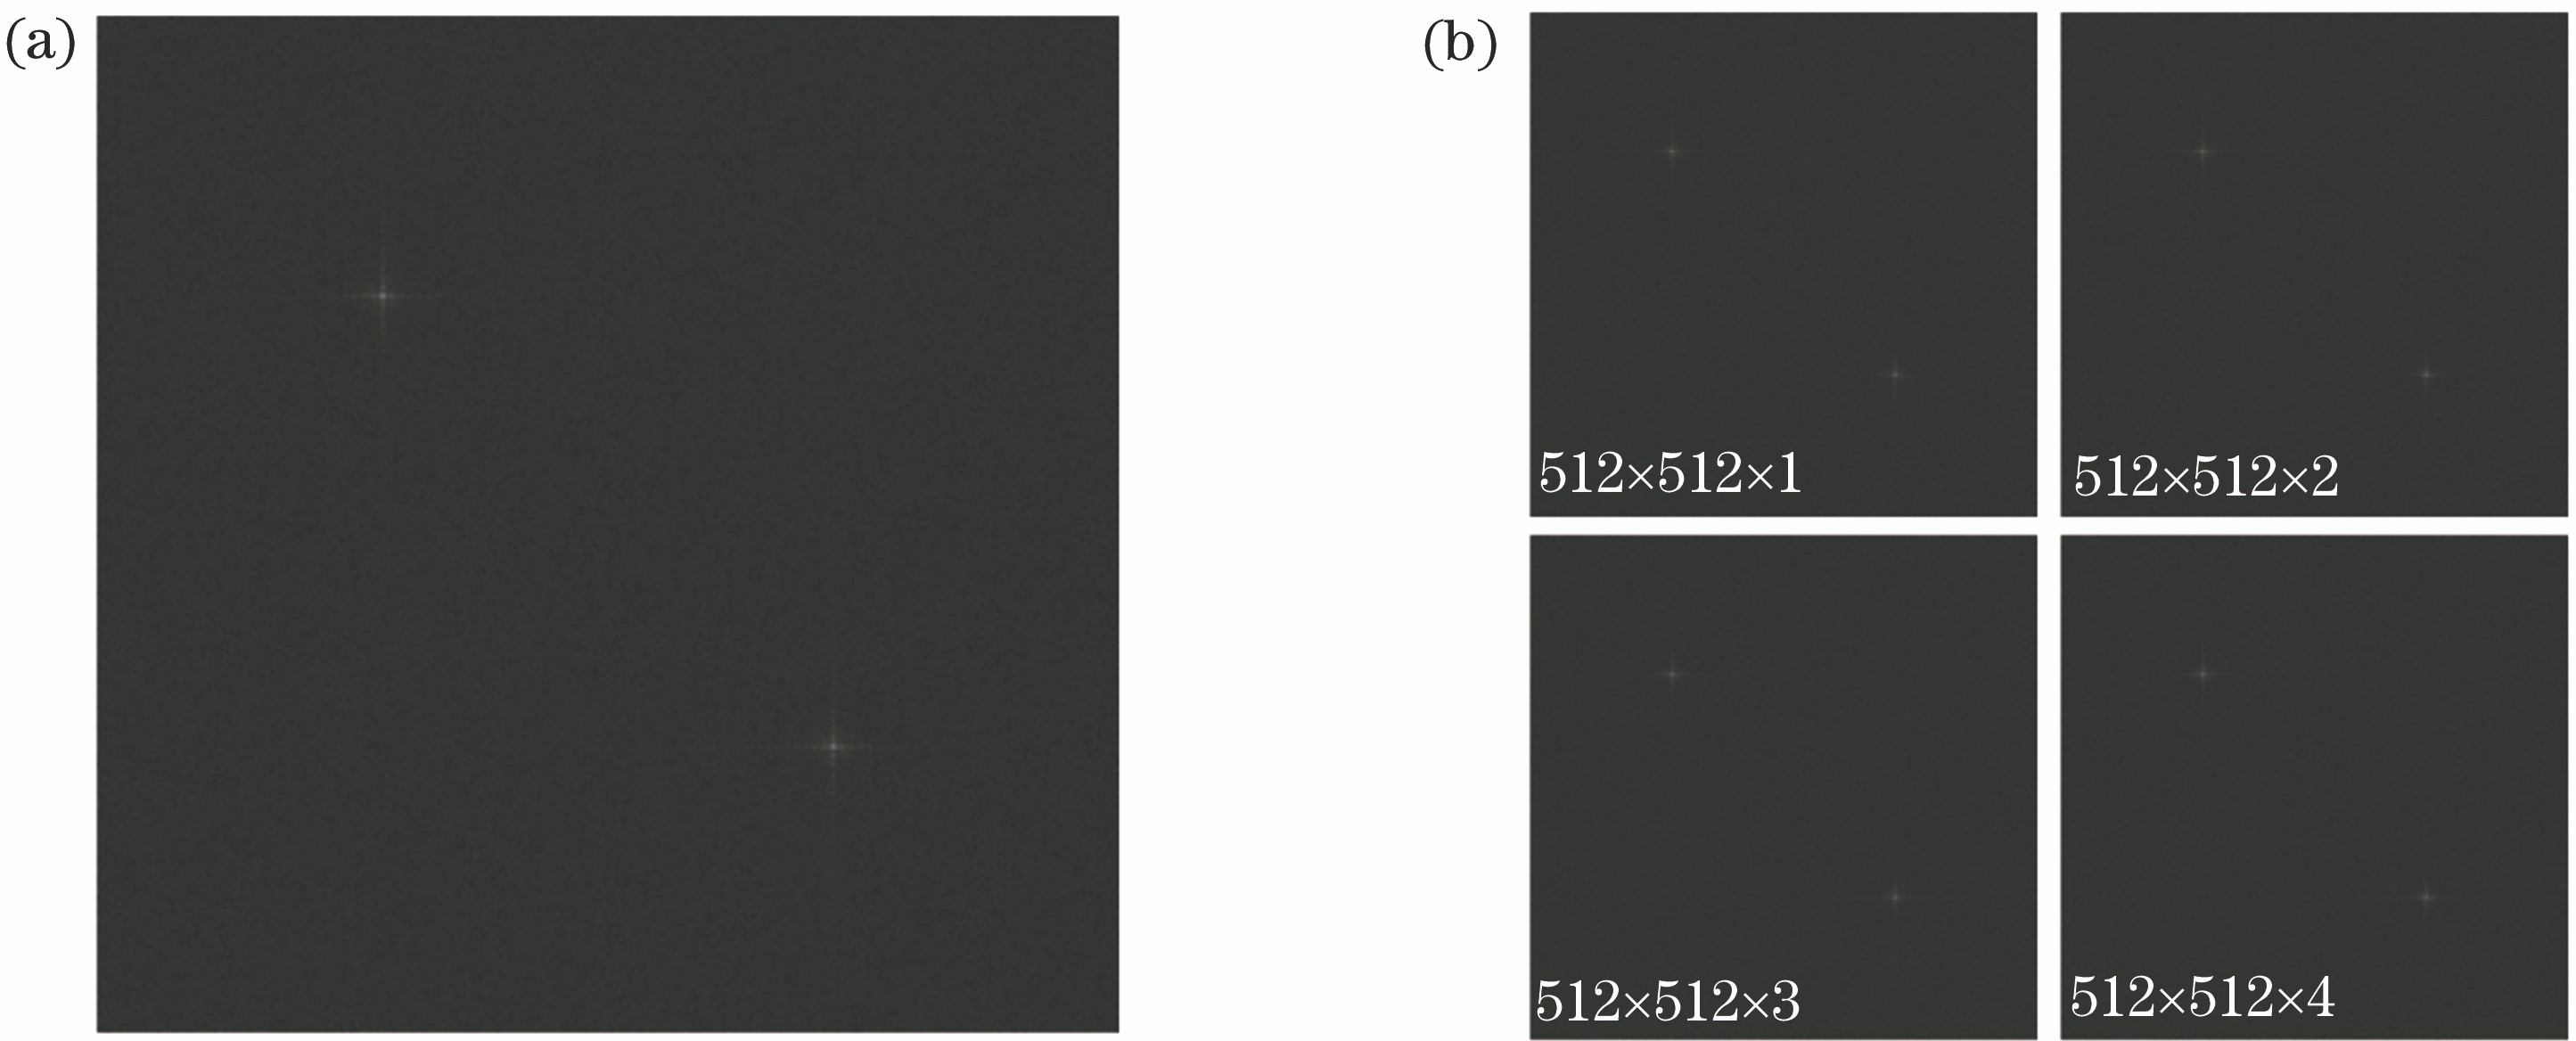 Comparison spectrogram before and after downscale. (a) Before downscale; (b) after downscale